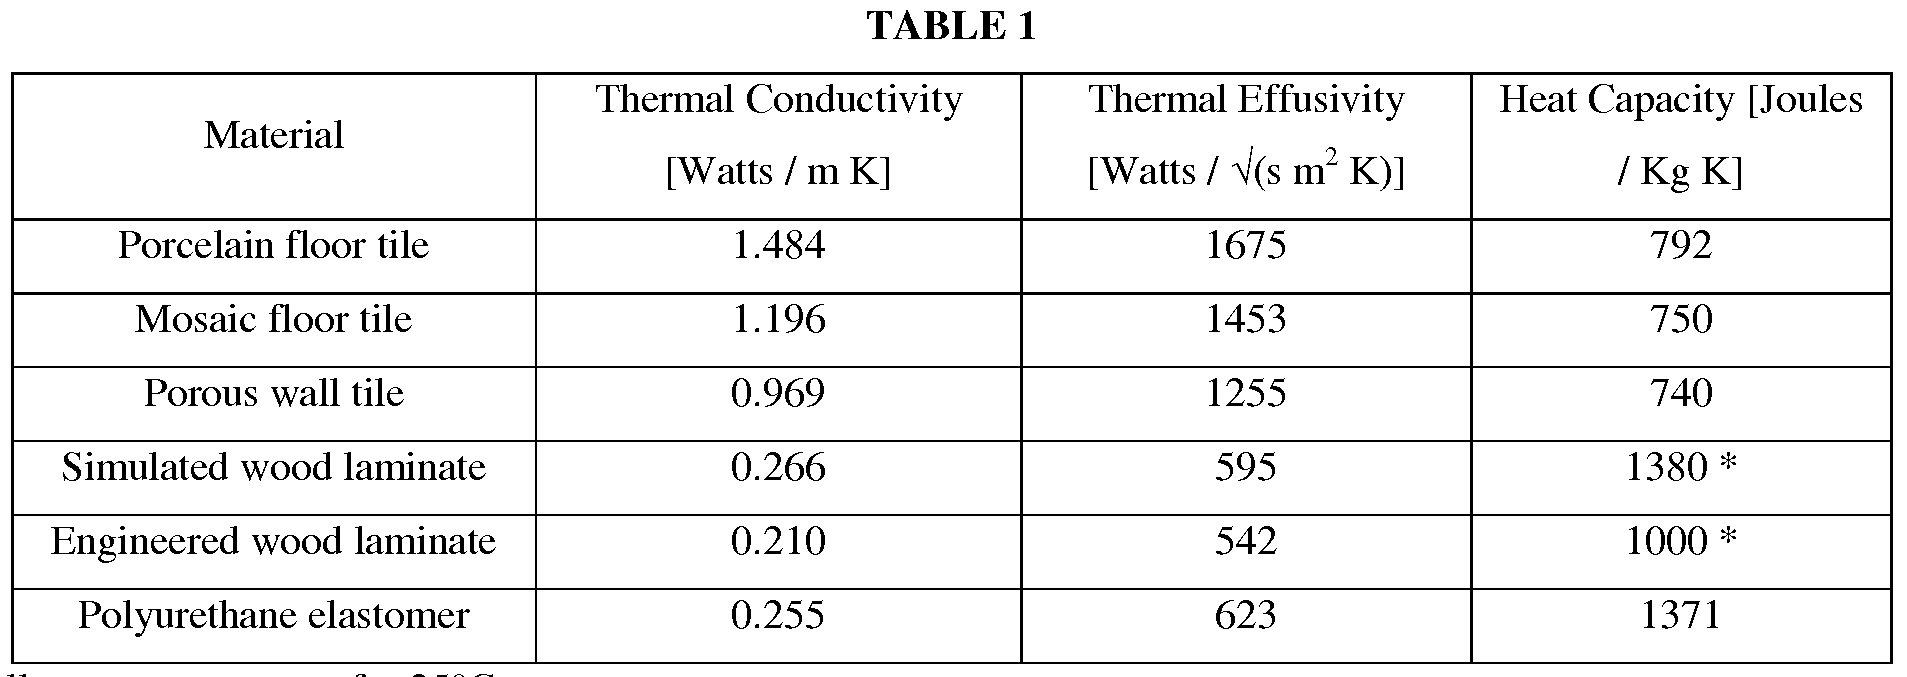 Thermal Conductivity Of Ceiling Tilespatent ep2430260a2 tile systems with enhanced thermal properties